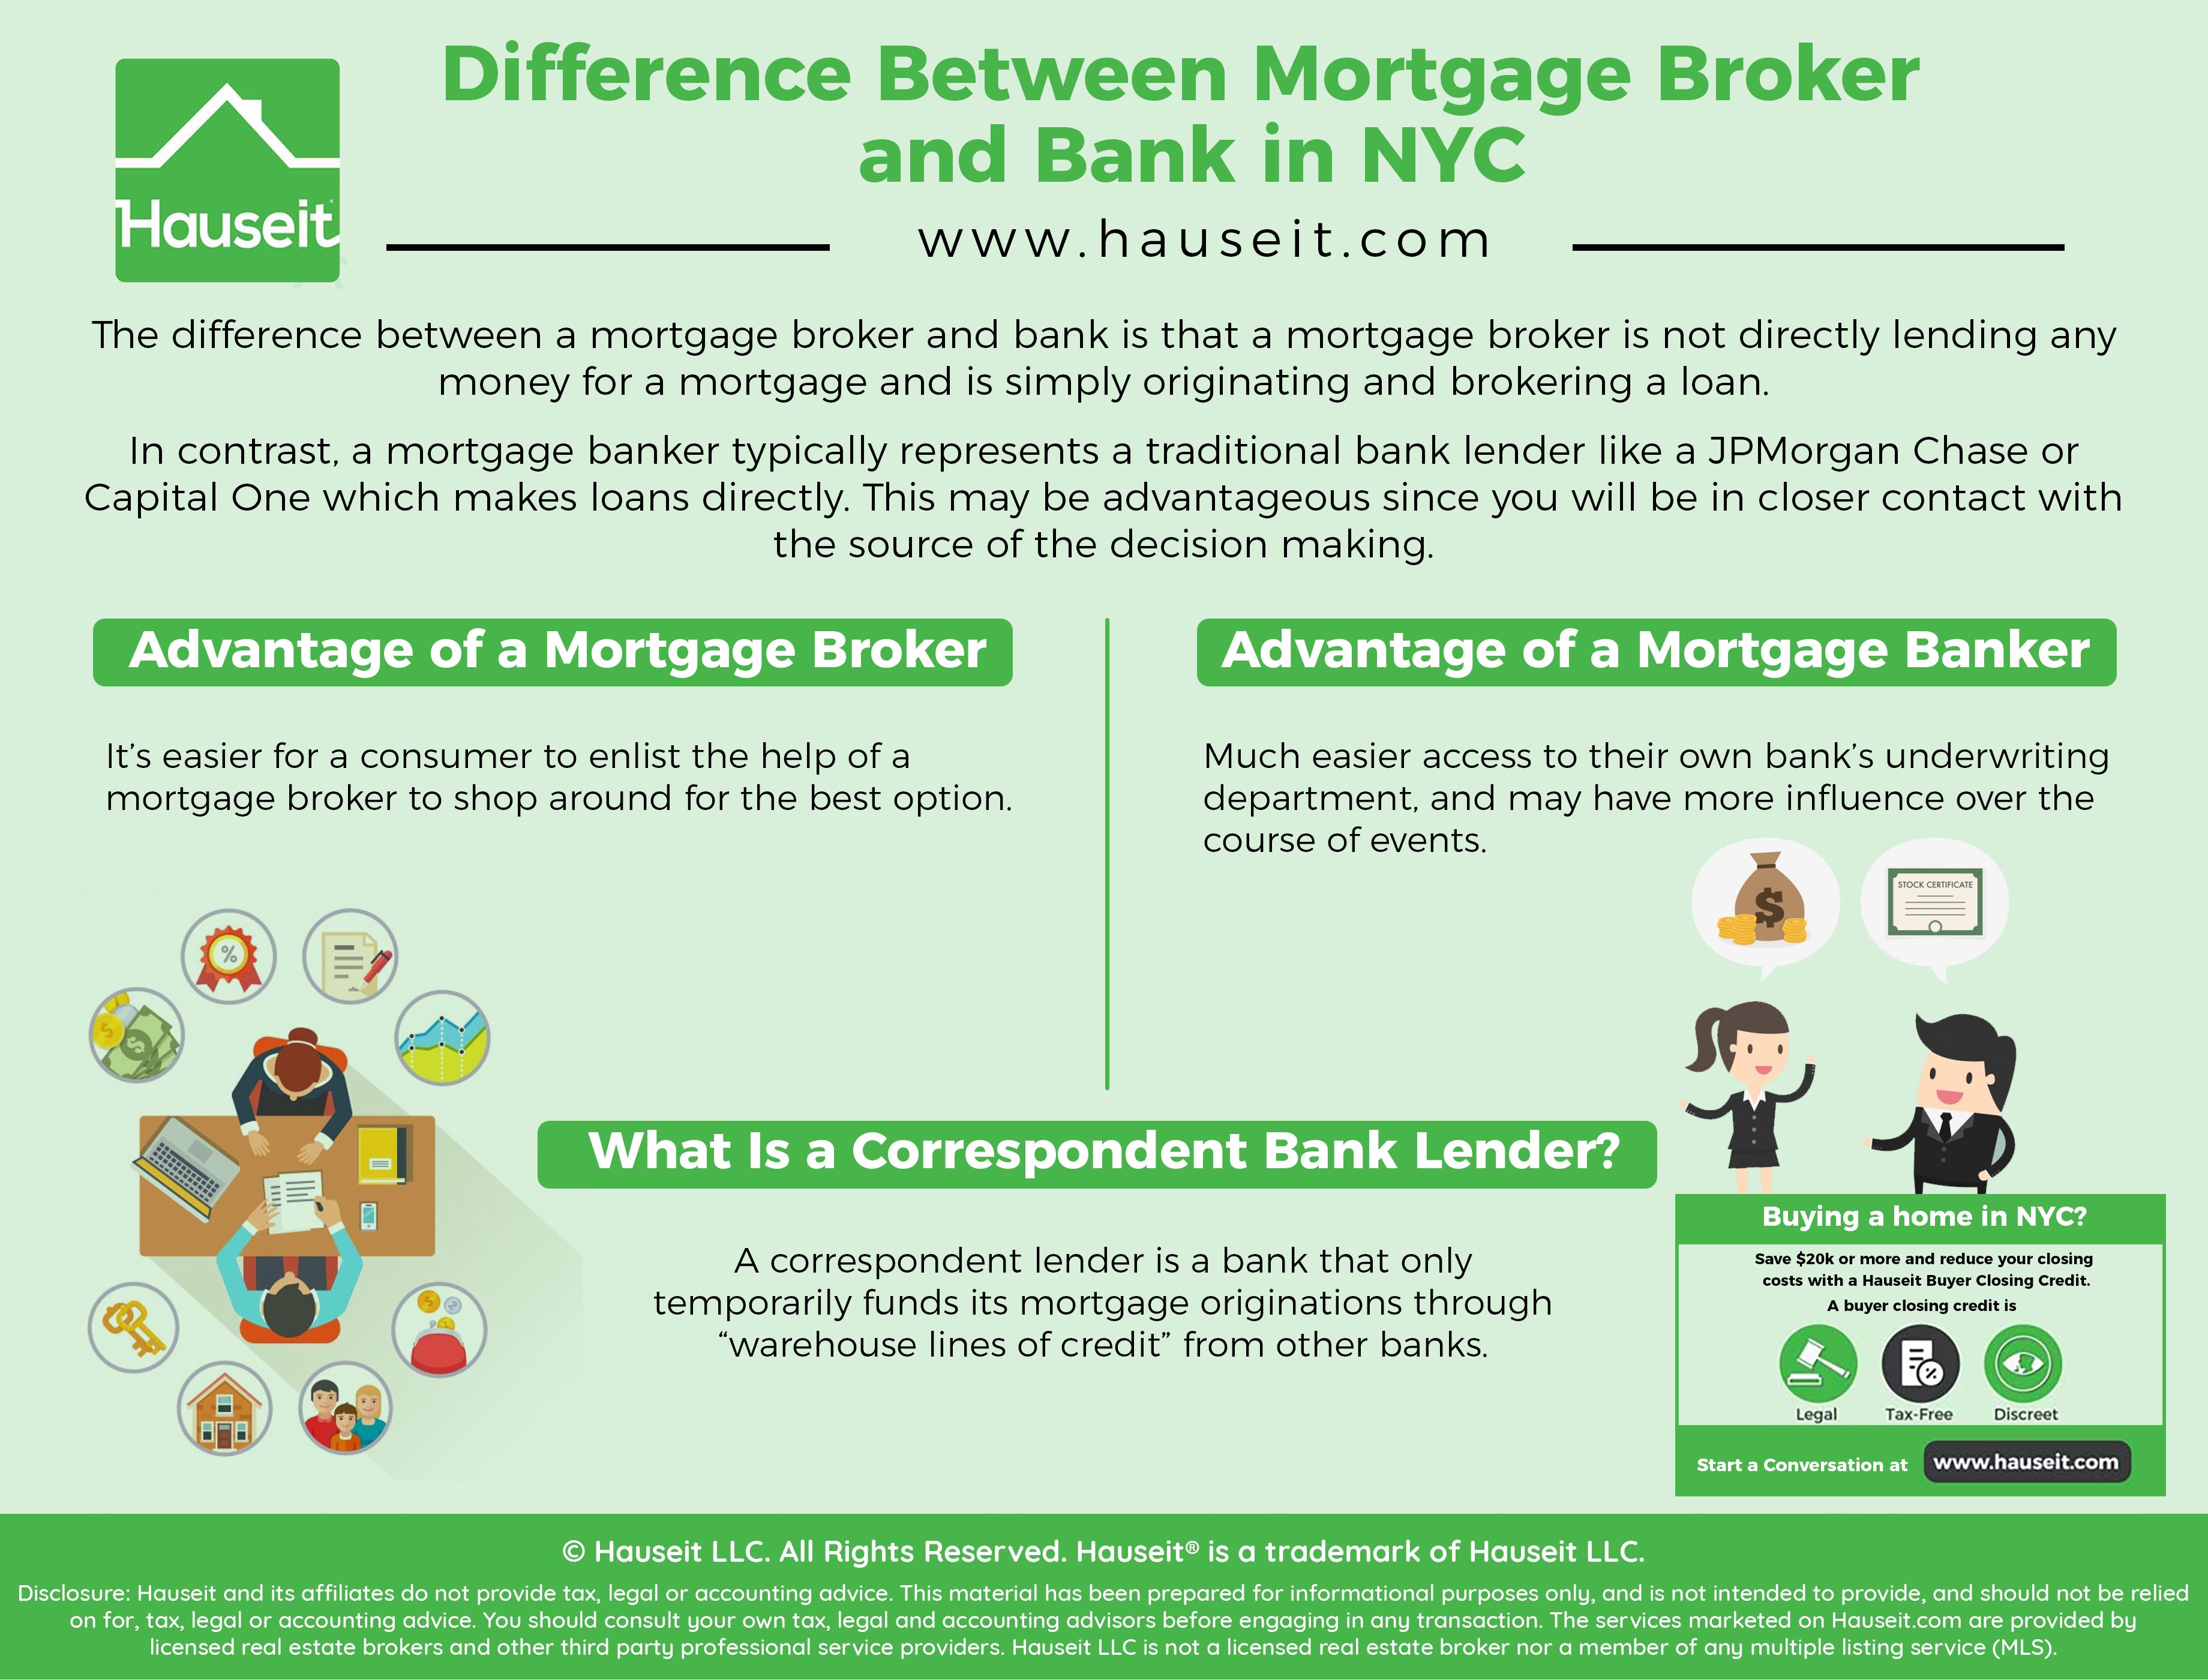 The difference between a mortgage broker and bank is that a mortgage broker is not directly lending any money for a mortgage and is simply originating and brokering a loan while a mortgage banker typically represents a traditional bank lender like a JPMorgan Chase or Capital One which makes loans directly.